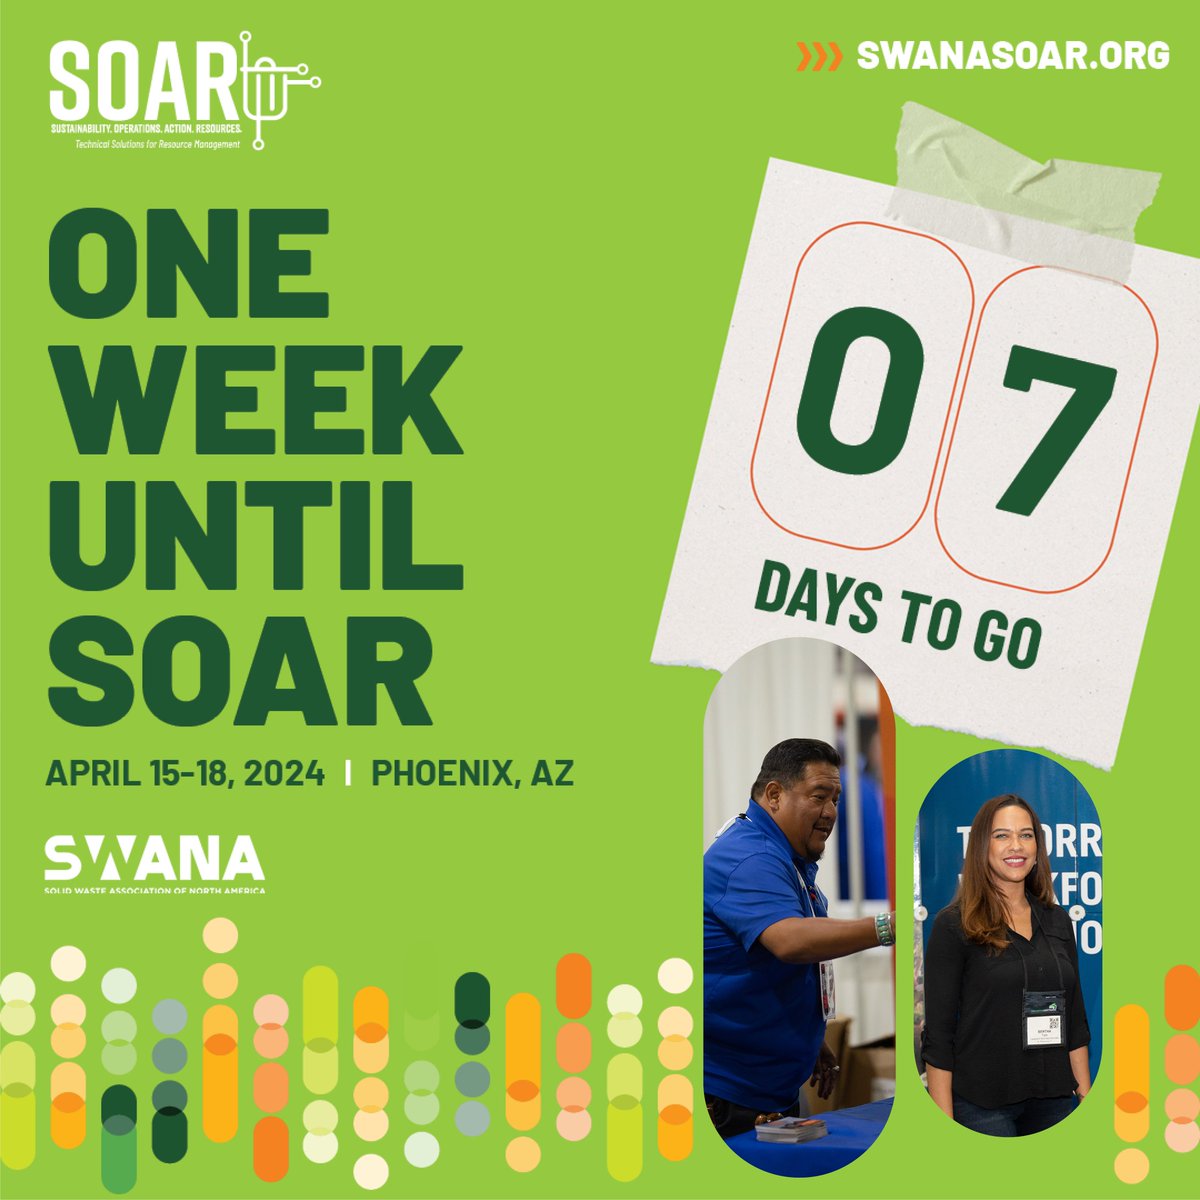 Join us next week in Phoenix, AZ and learn from industry leaders at our keynote and educational sessions, engage with industry experts during catalyst sessions, explore cutting-edge technologies in our exhibit hall, network with like-minded professionals at our networking events,…